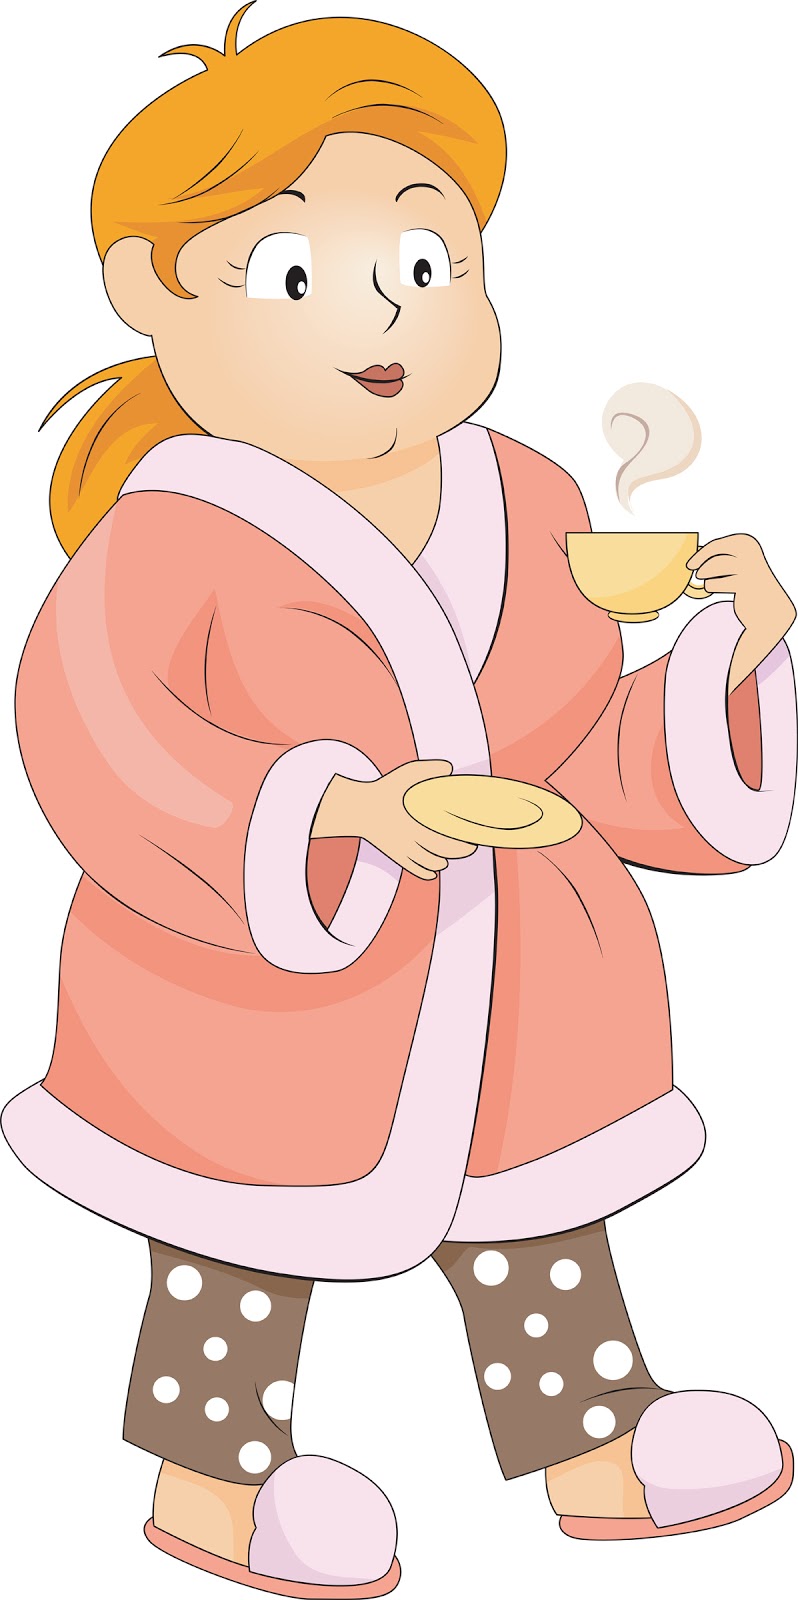 putting on pajamas clipart - Clip Art Library